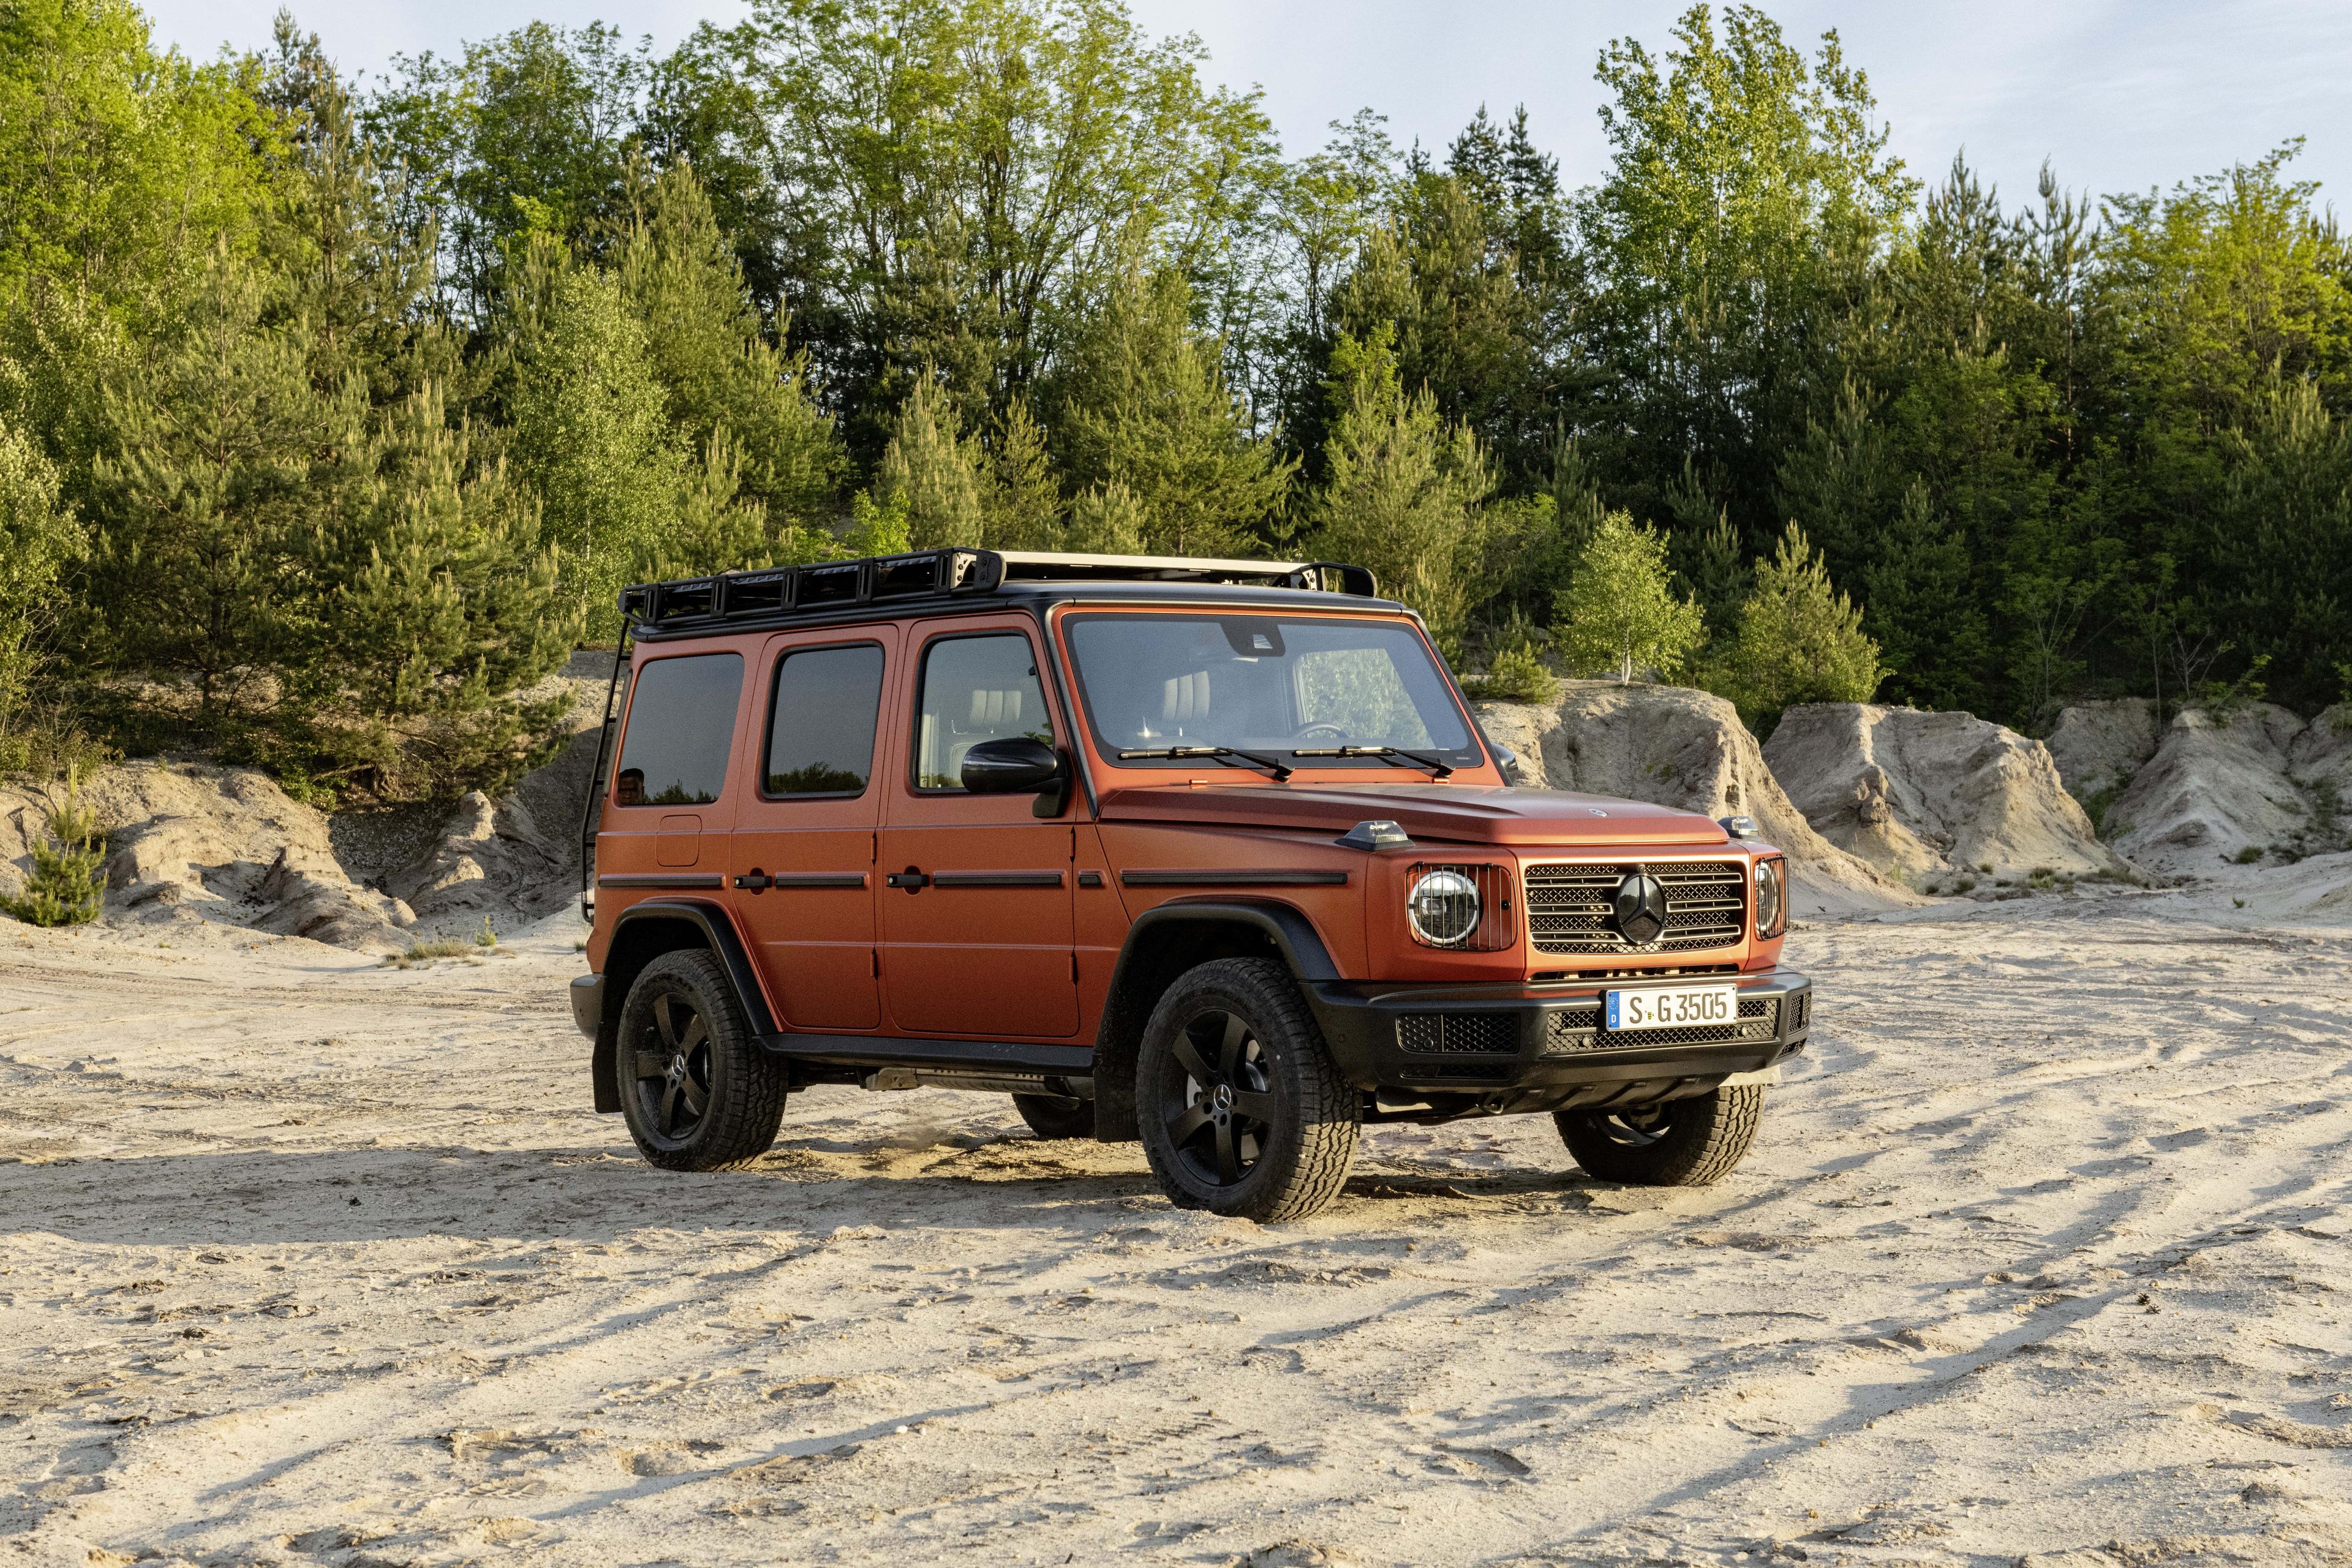 The Mercedes-Benz G-Class is a luxurious SUV with impressive off-road capabilities.